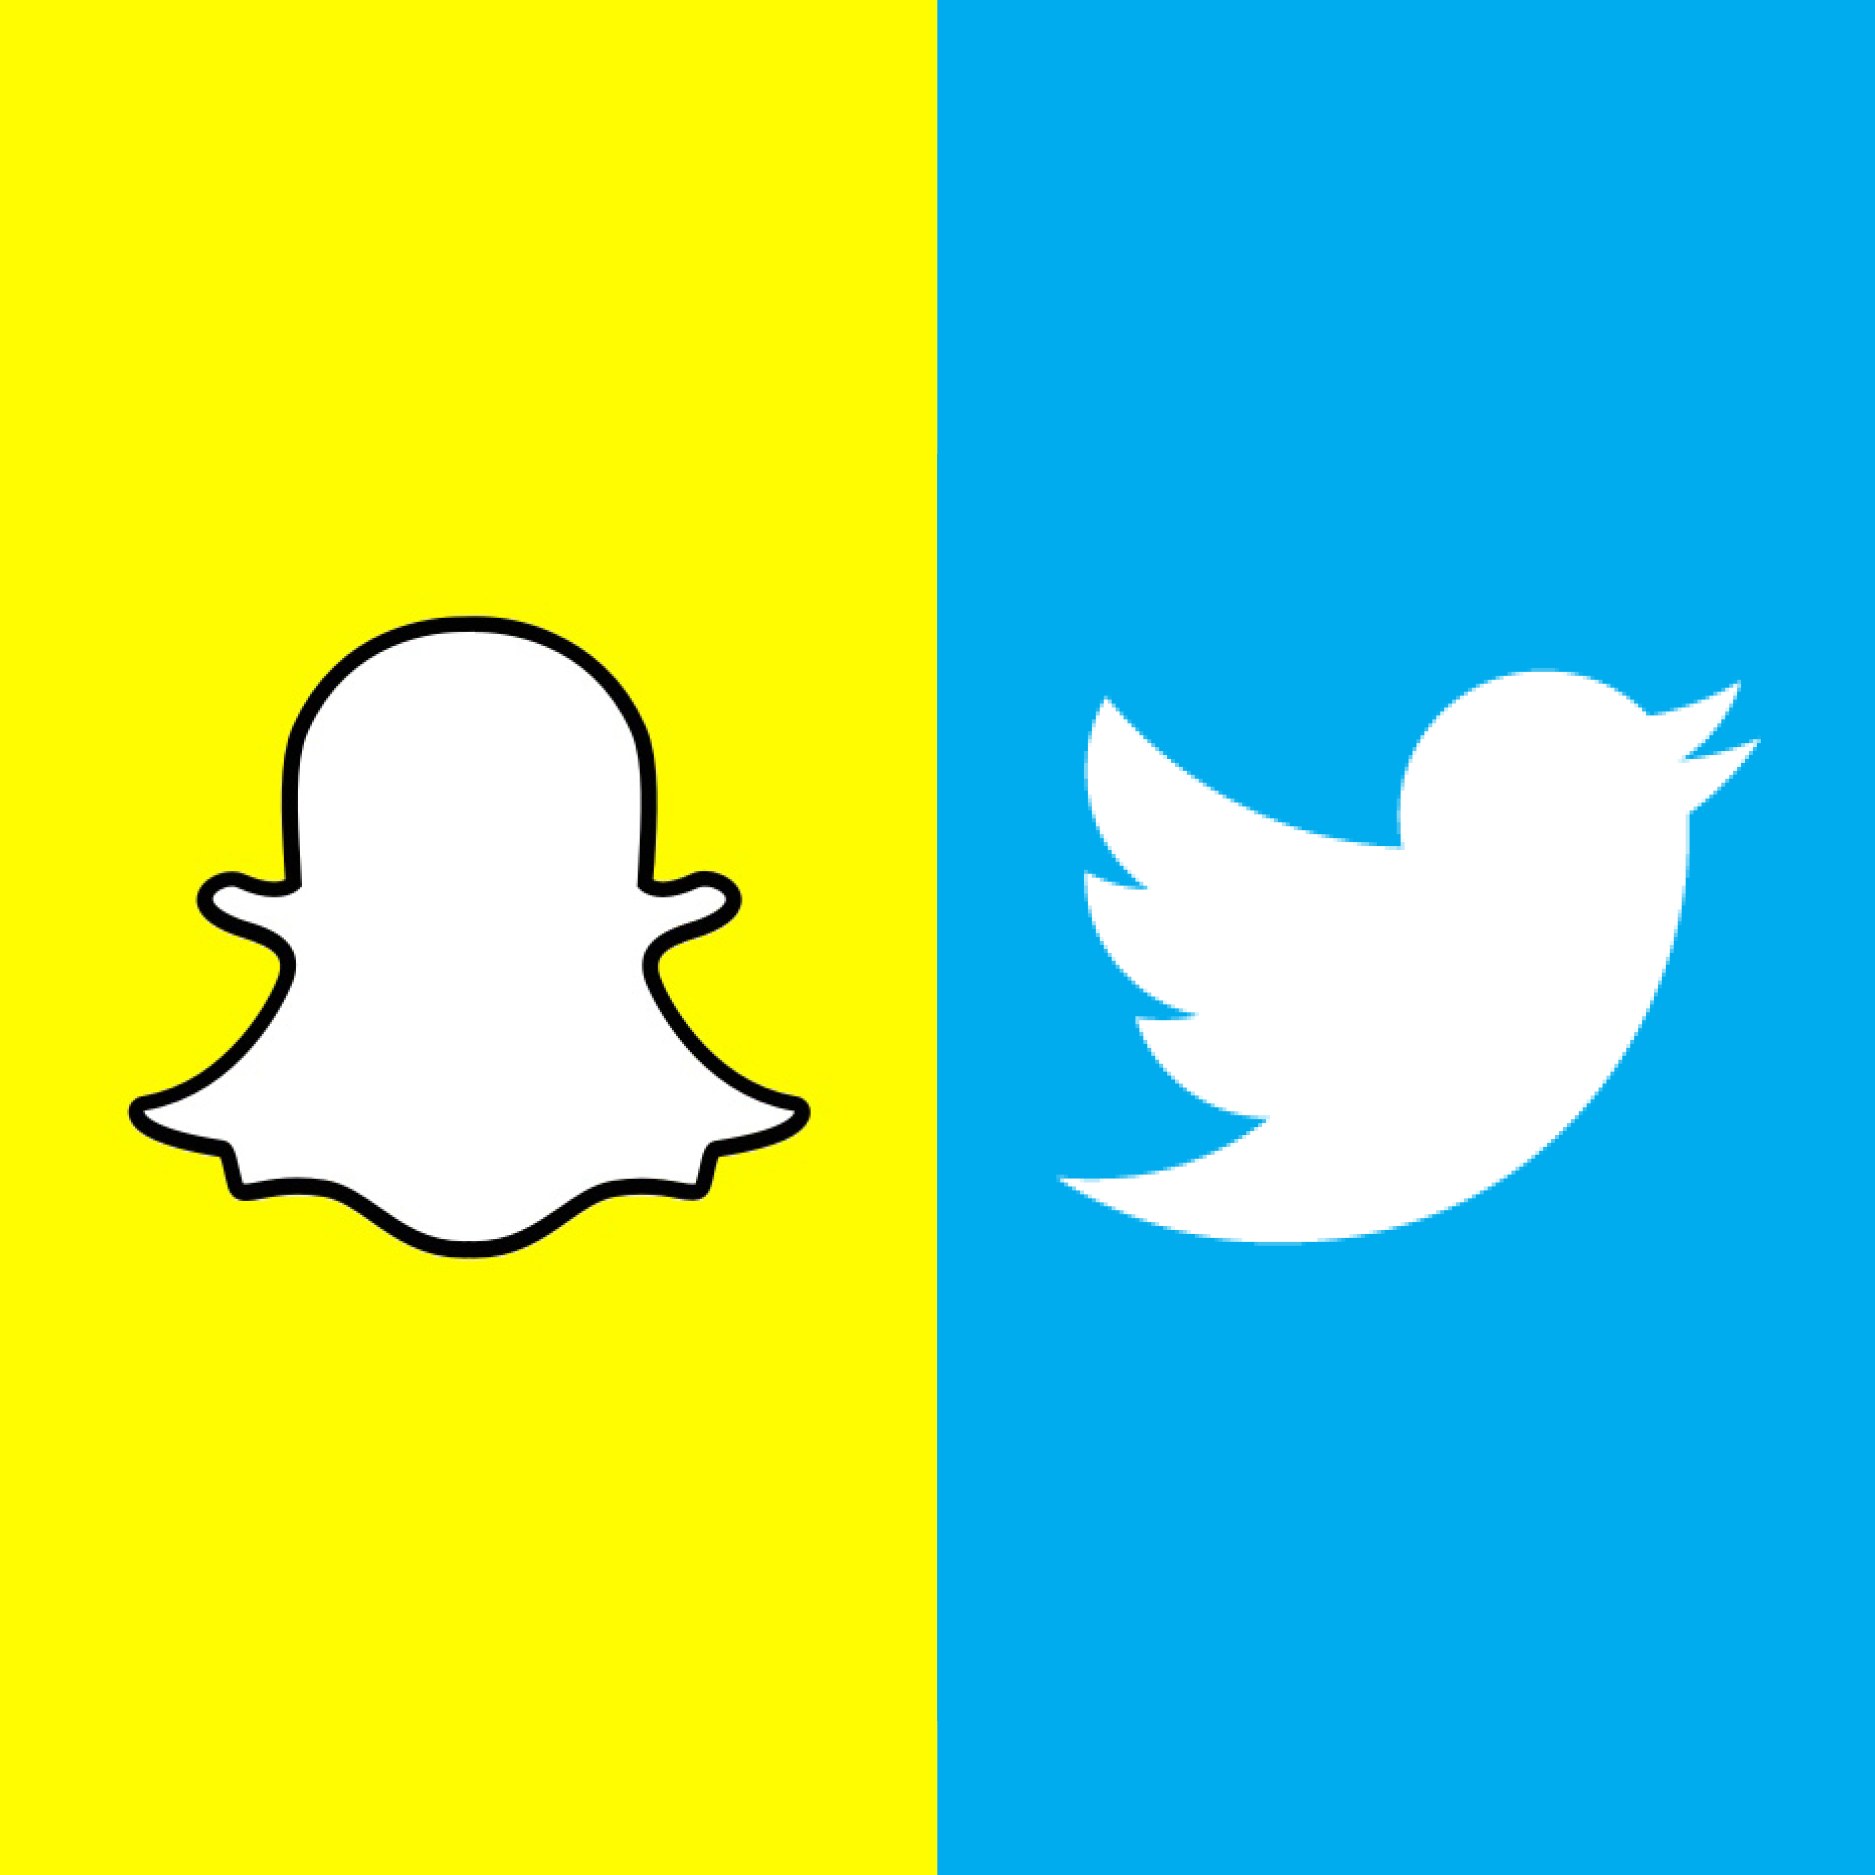 Has Snapchat Learned From Twitter’s IPO? 